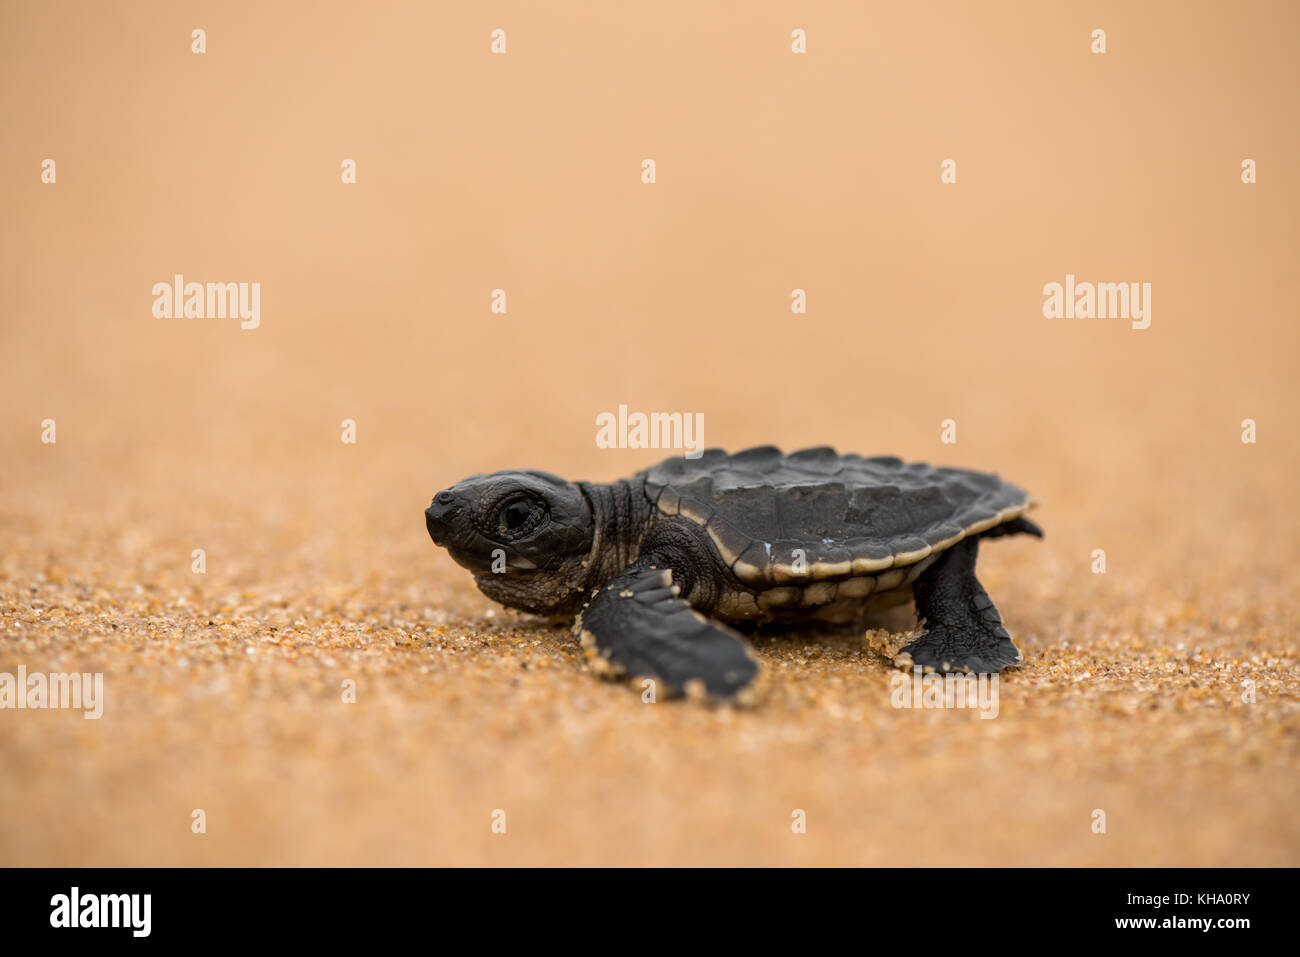 An Olive ridley sea turtle baby from Odisha, India. Stock Photo